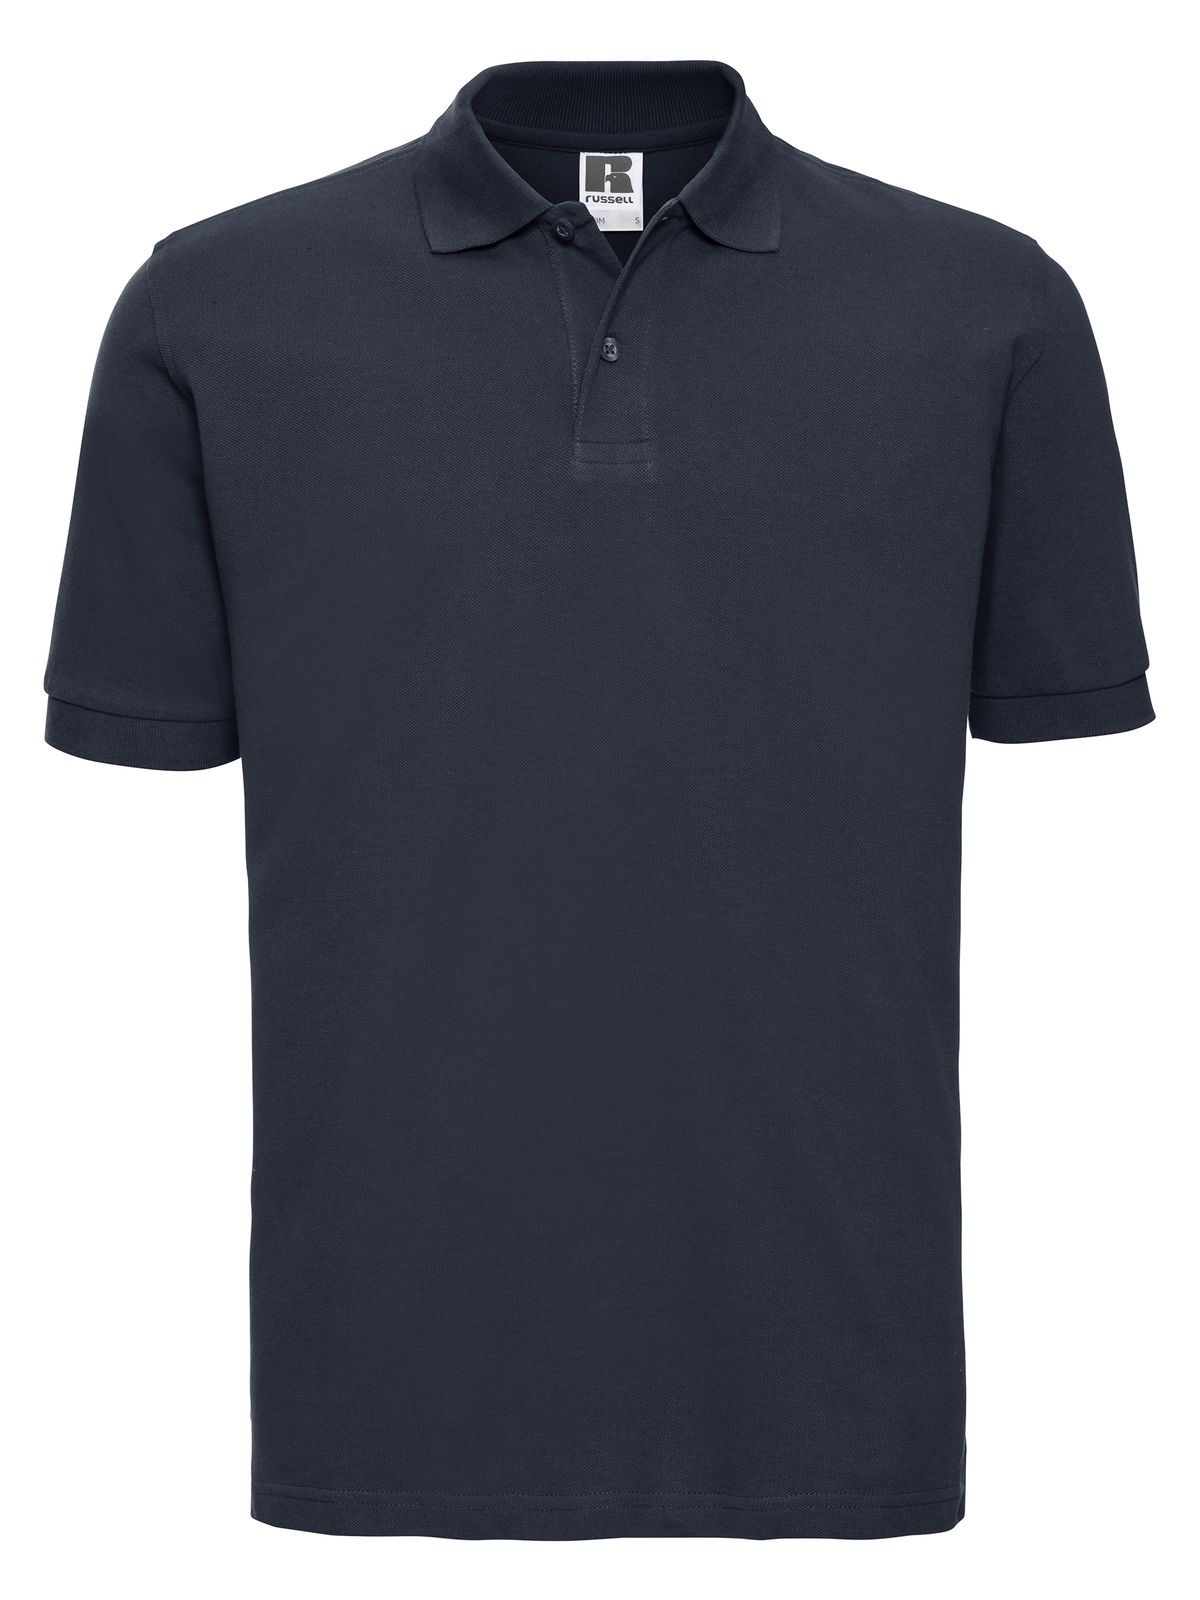 mens-classic-cotton-polo-french-navy.webp